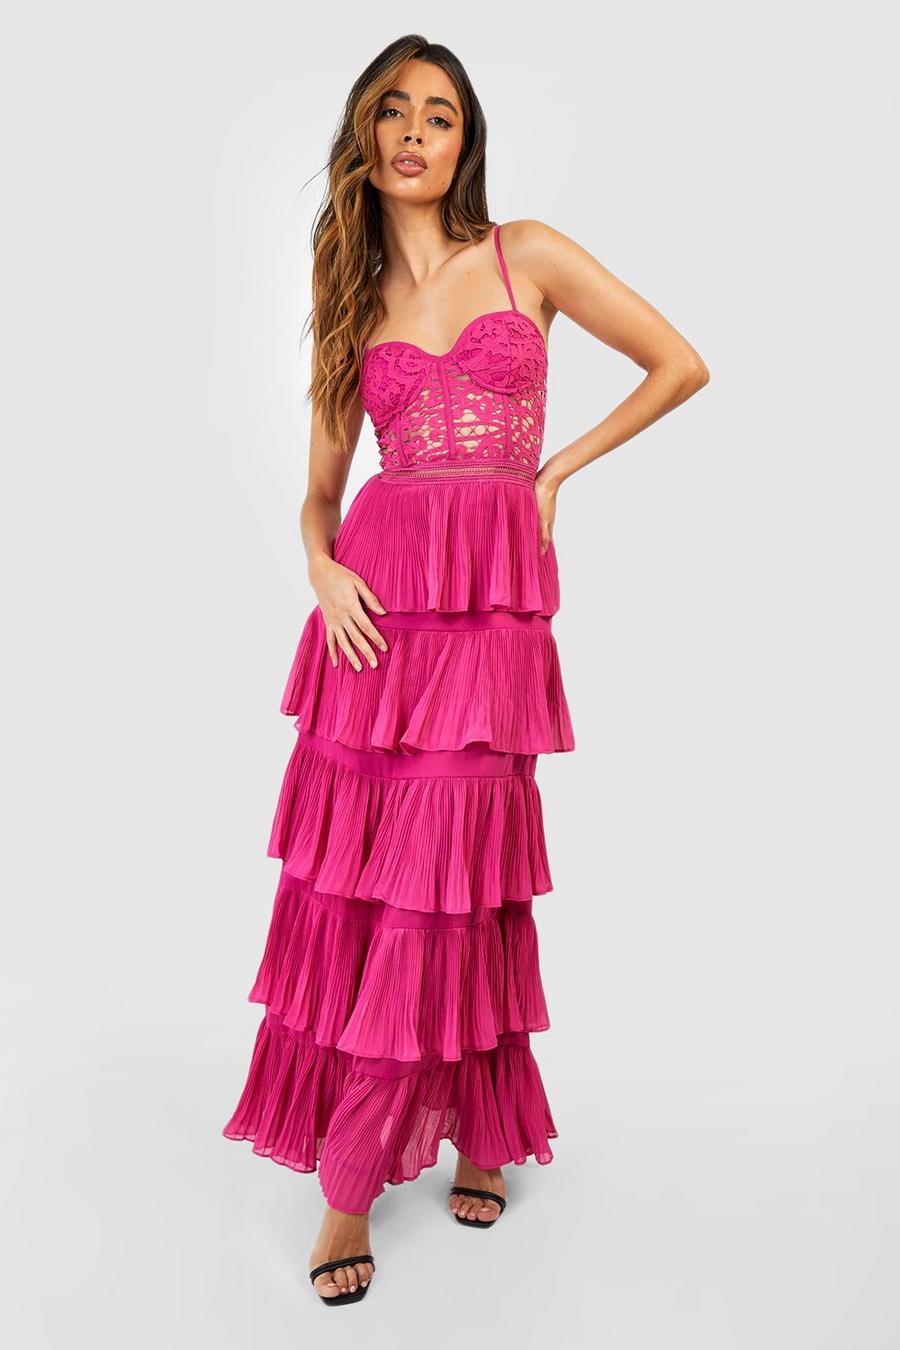 Hot pink rose Lace Corset Detail Pleated Maxi Dress